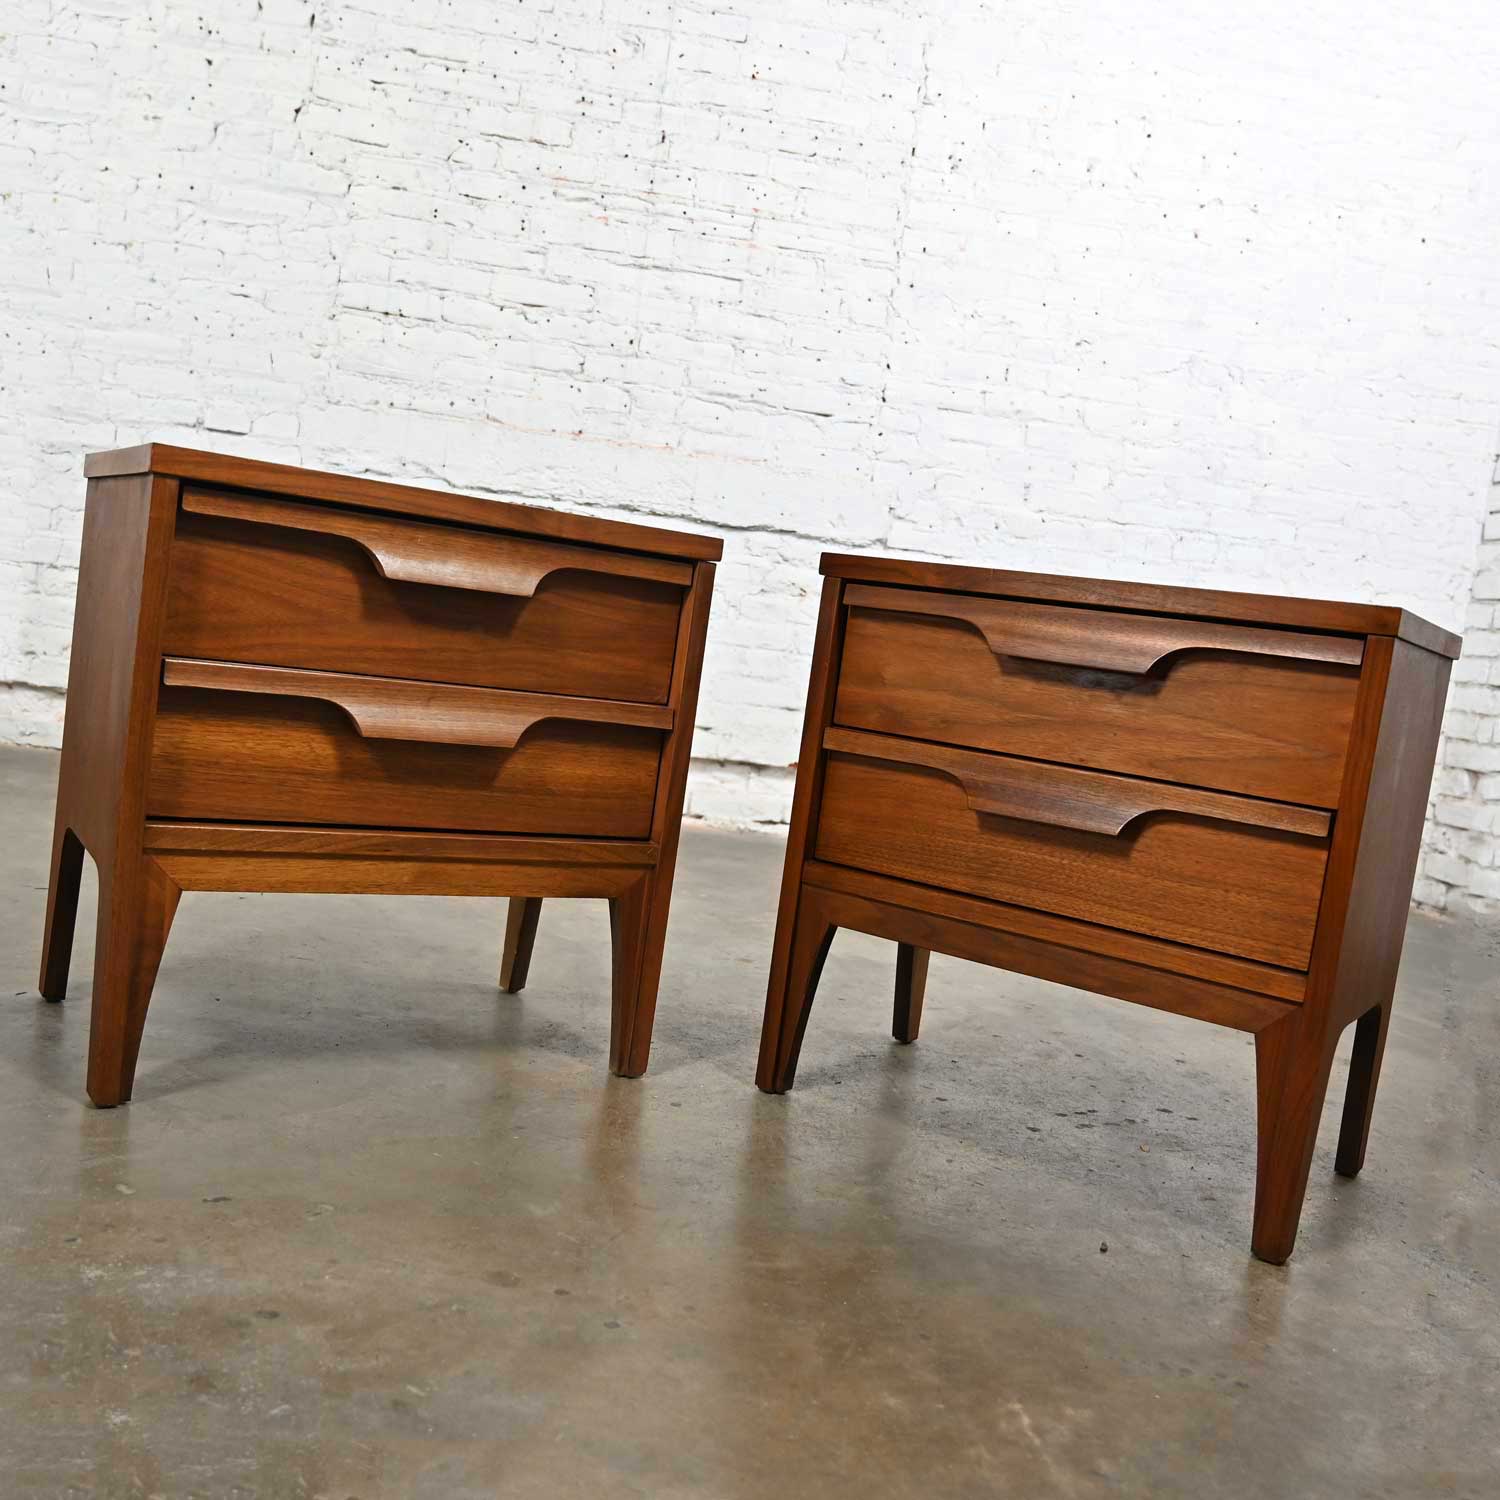 Vintage Mid Century Modern Johnson Carper Fashion Trend Pair of Walnut Nightstands or End Tables